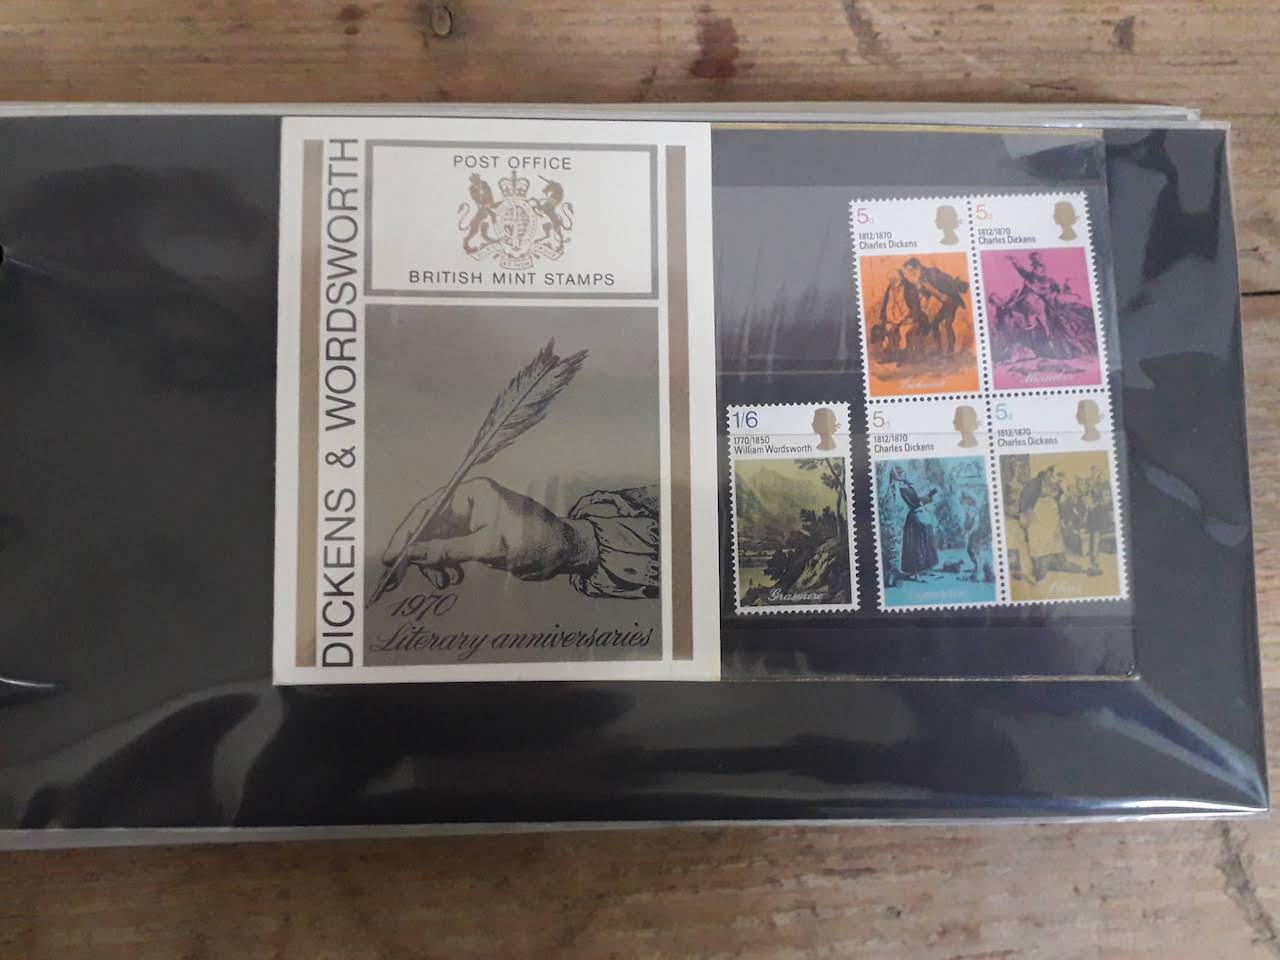 GB British Post Office mint stamp packs, 4 albums, circa 1970s, some high value, collectors packs, - Image 28 of 46